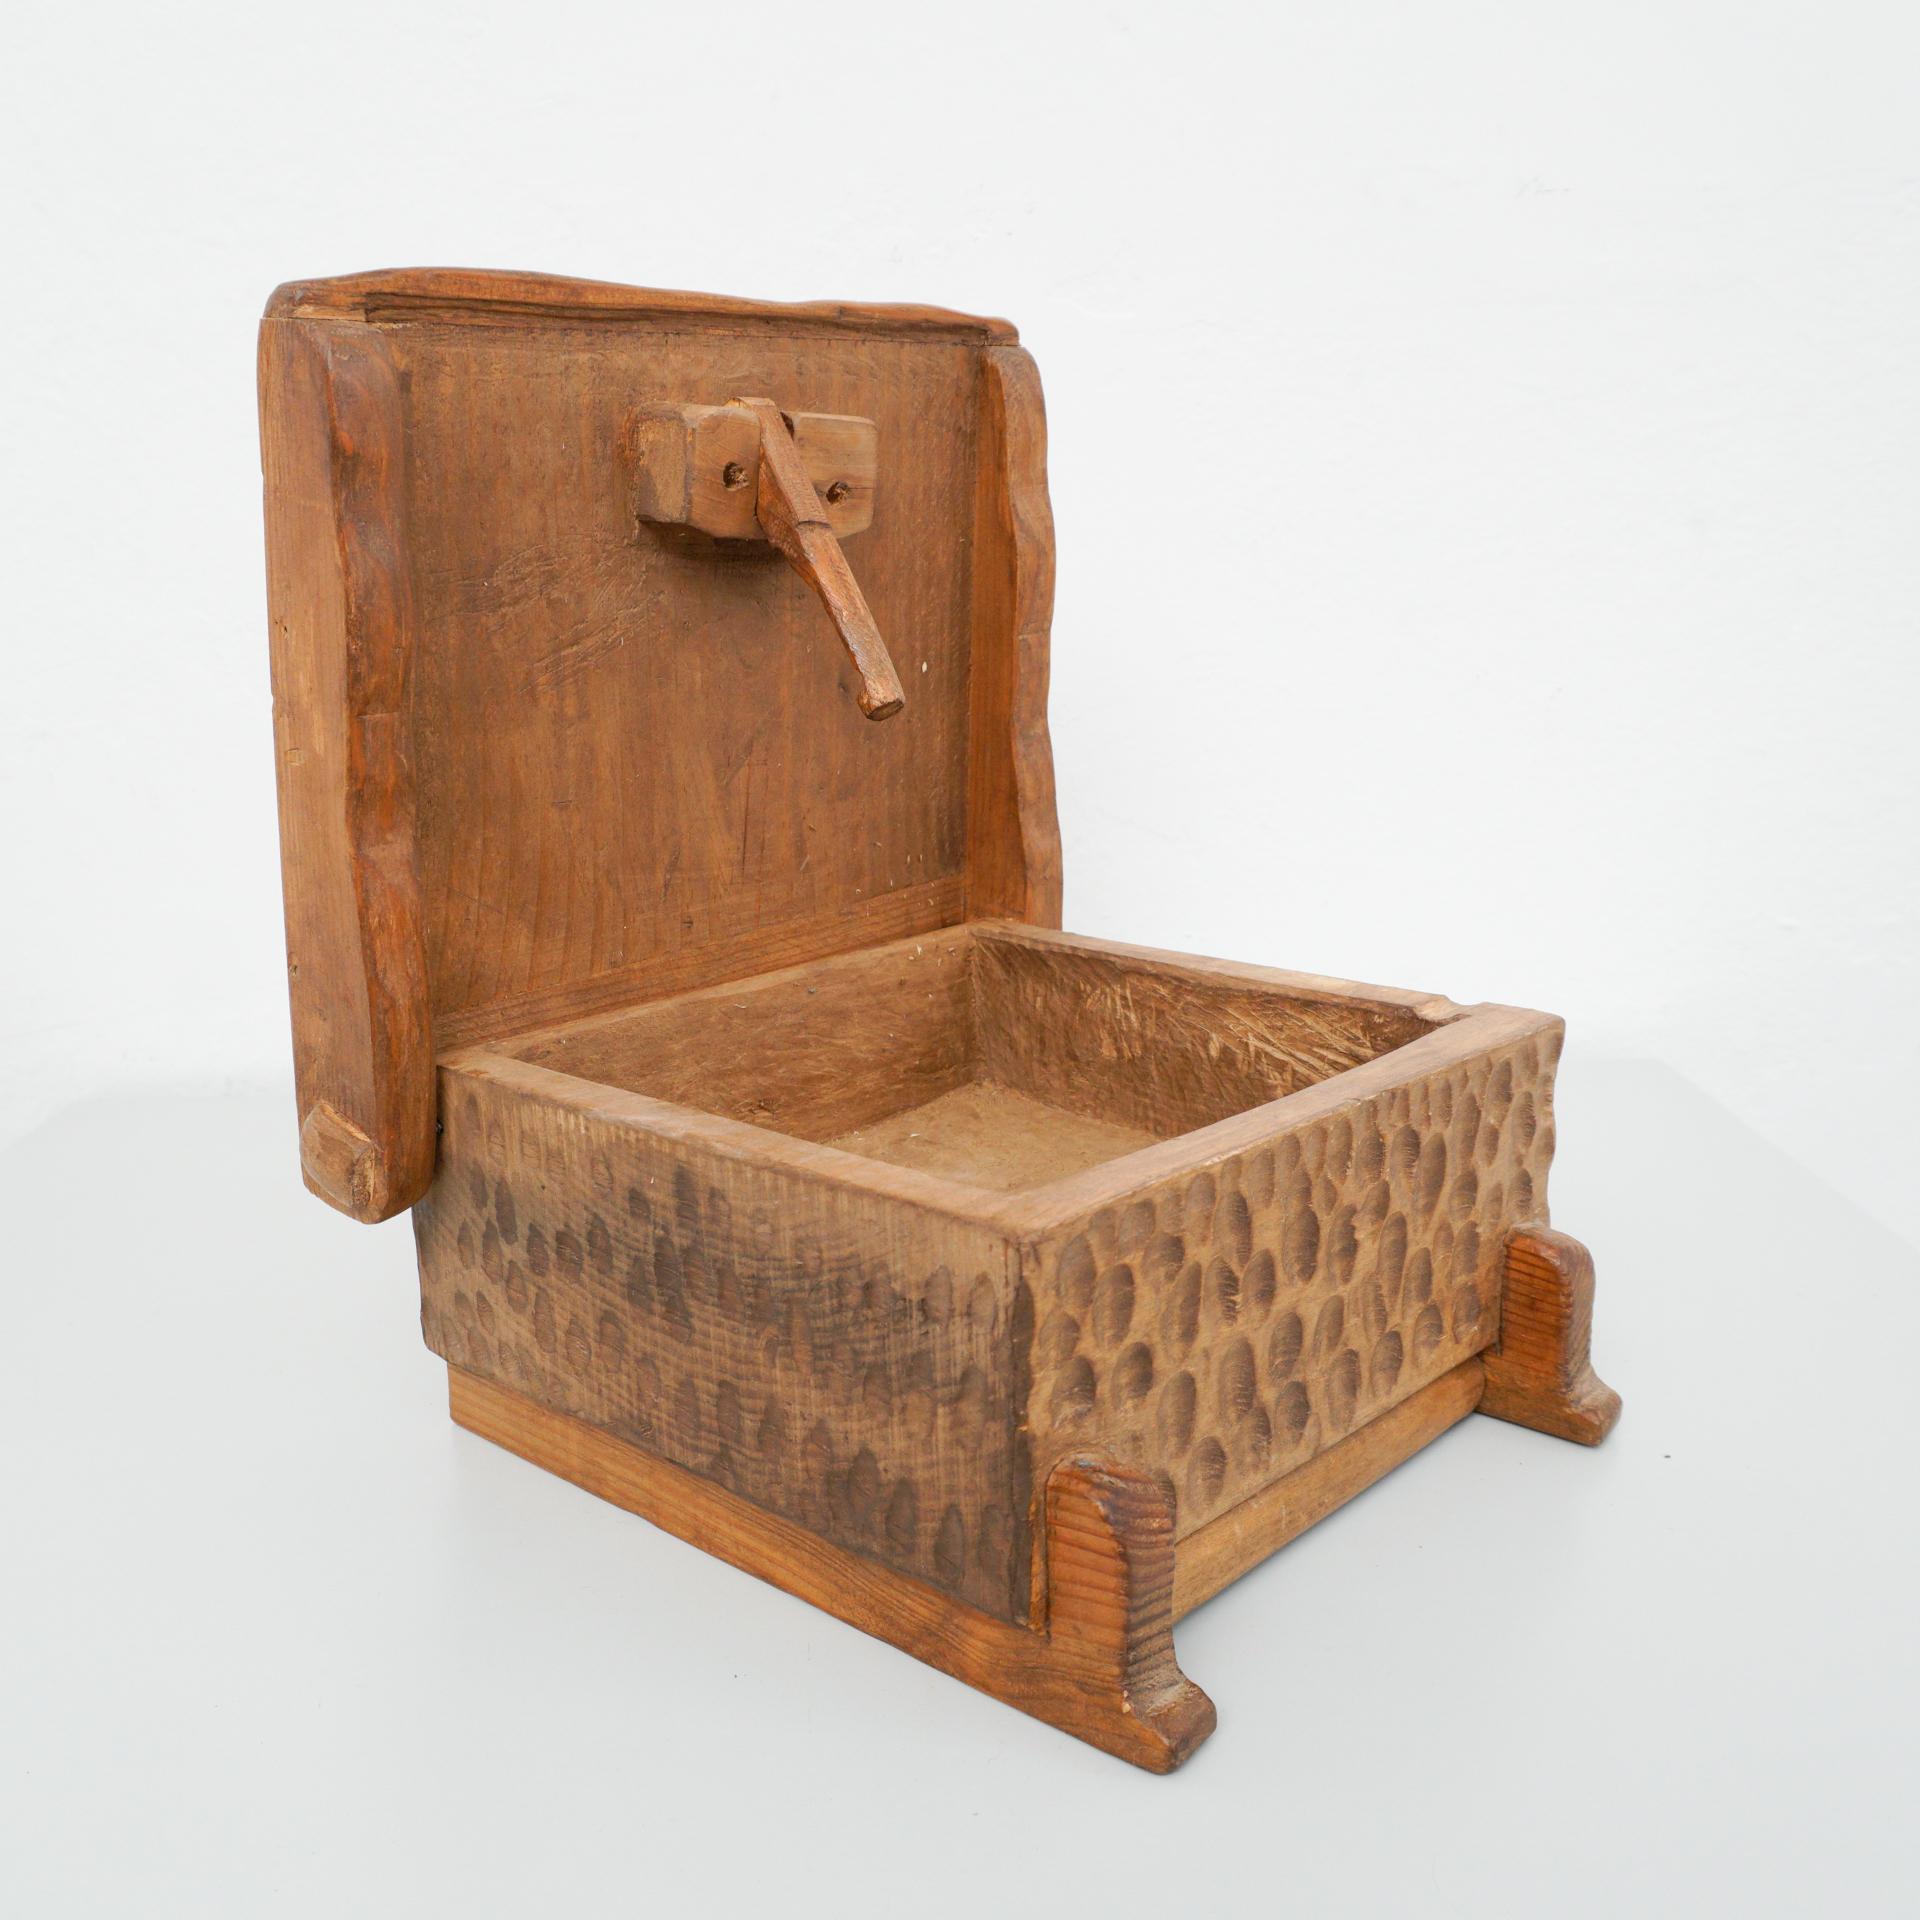 Wood Handcarved Box After Alexandre Noll In Good Condition For Sale In Barcelona, Barcelona